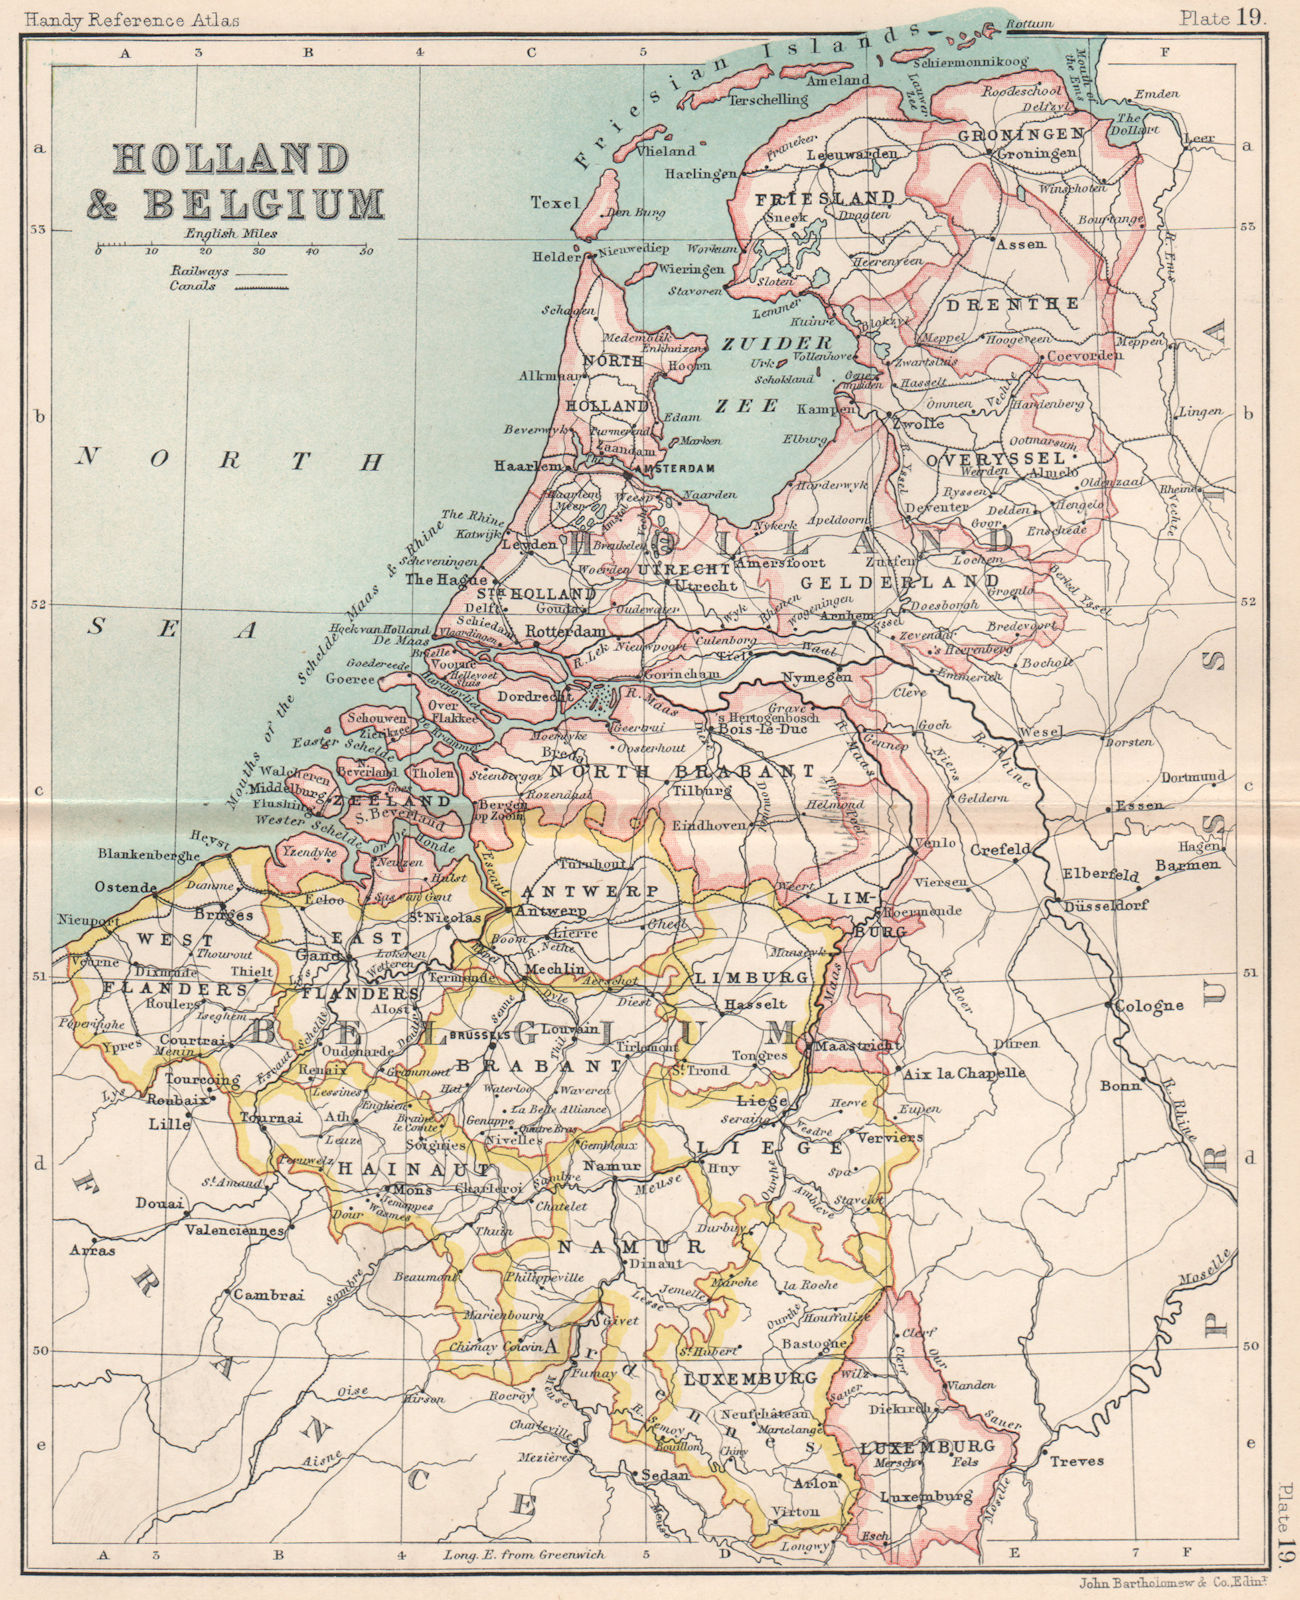 Holland and Belgium. Luxembourg. Benelux. BARTHOLOMEW 1904 old antique map